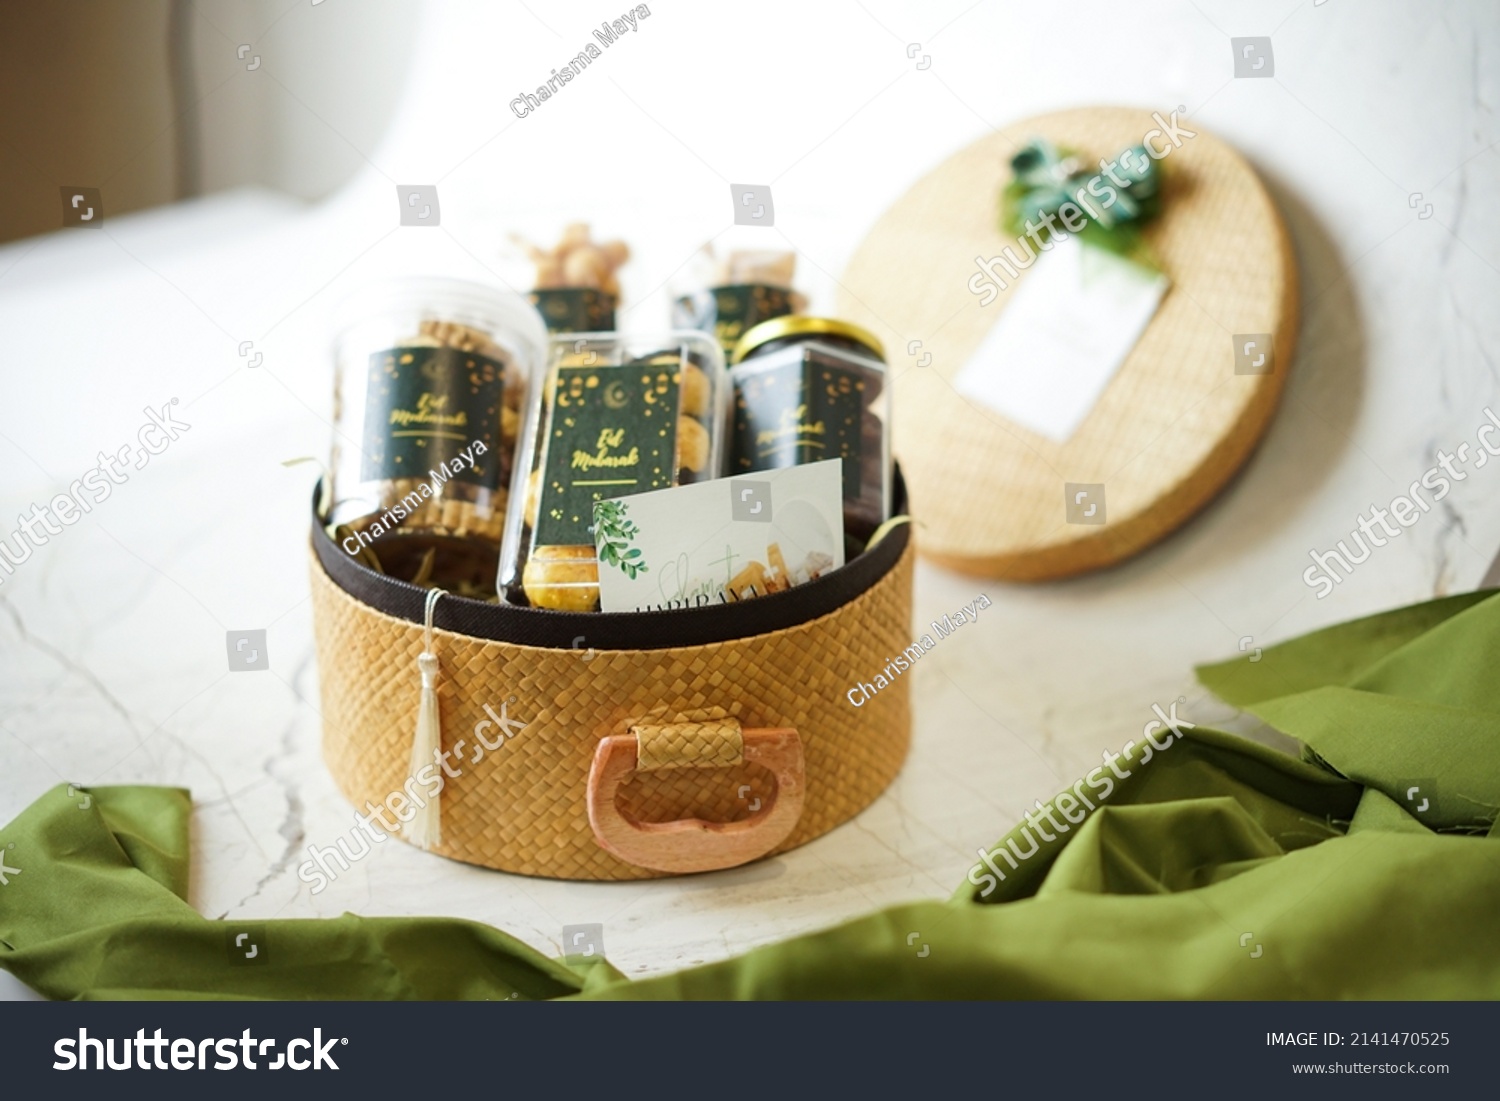 Ramadhan gift. Hampers moslem theme for celebrete the holy, bake snack, nastar, bakery, cookies, pudiing, chococips, roll cake, castangel.with greeting card and green accessories on white background #2141470525